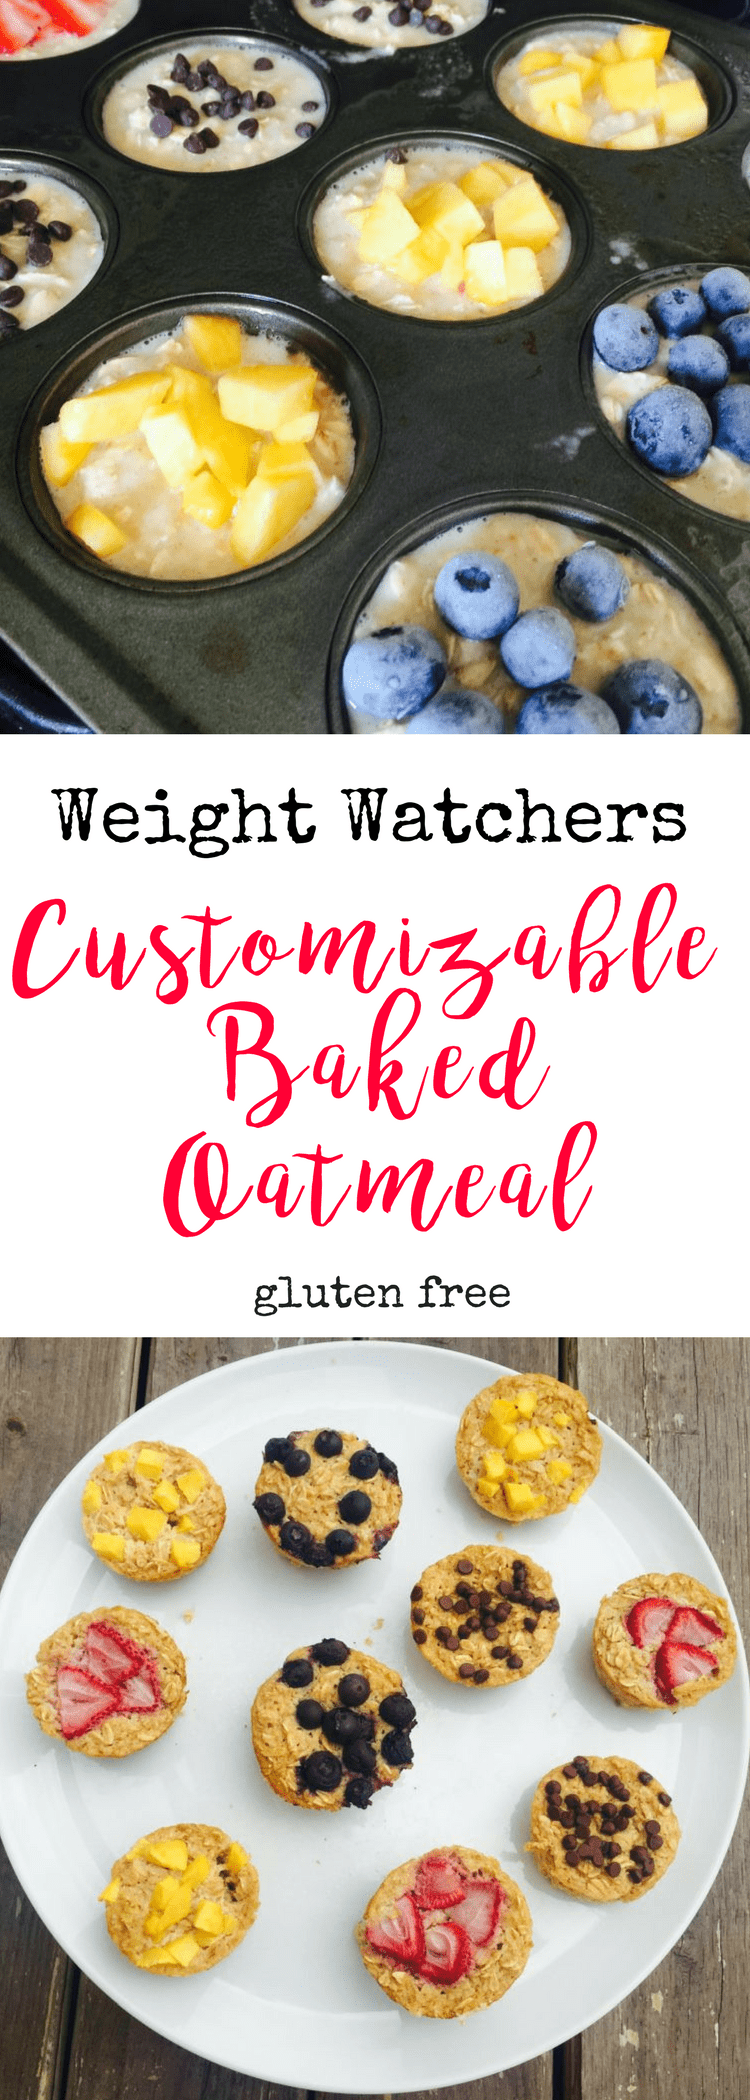 Weight Watchers Customizable Baked Oatmeal | Confessions of a Fit Foodie